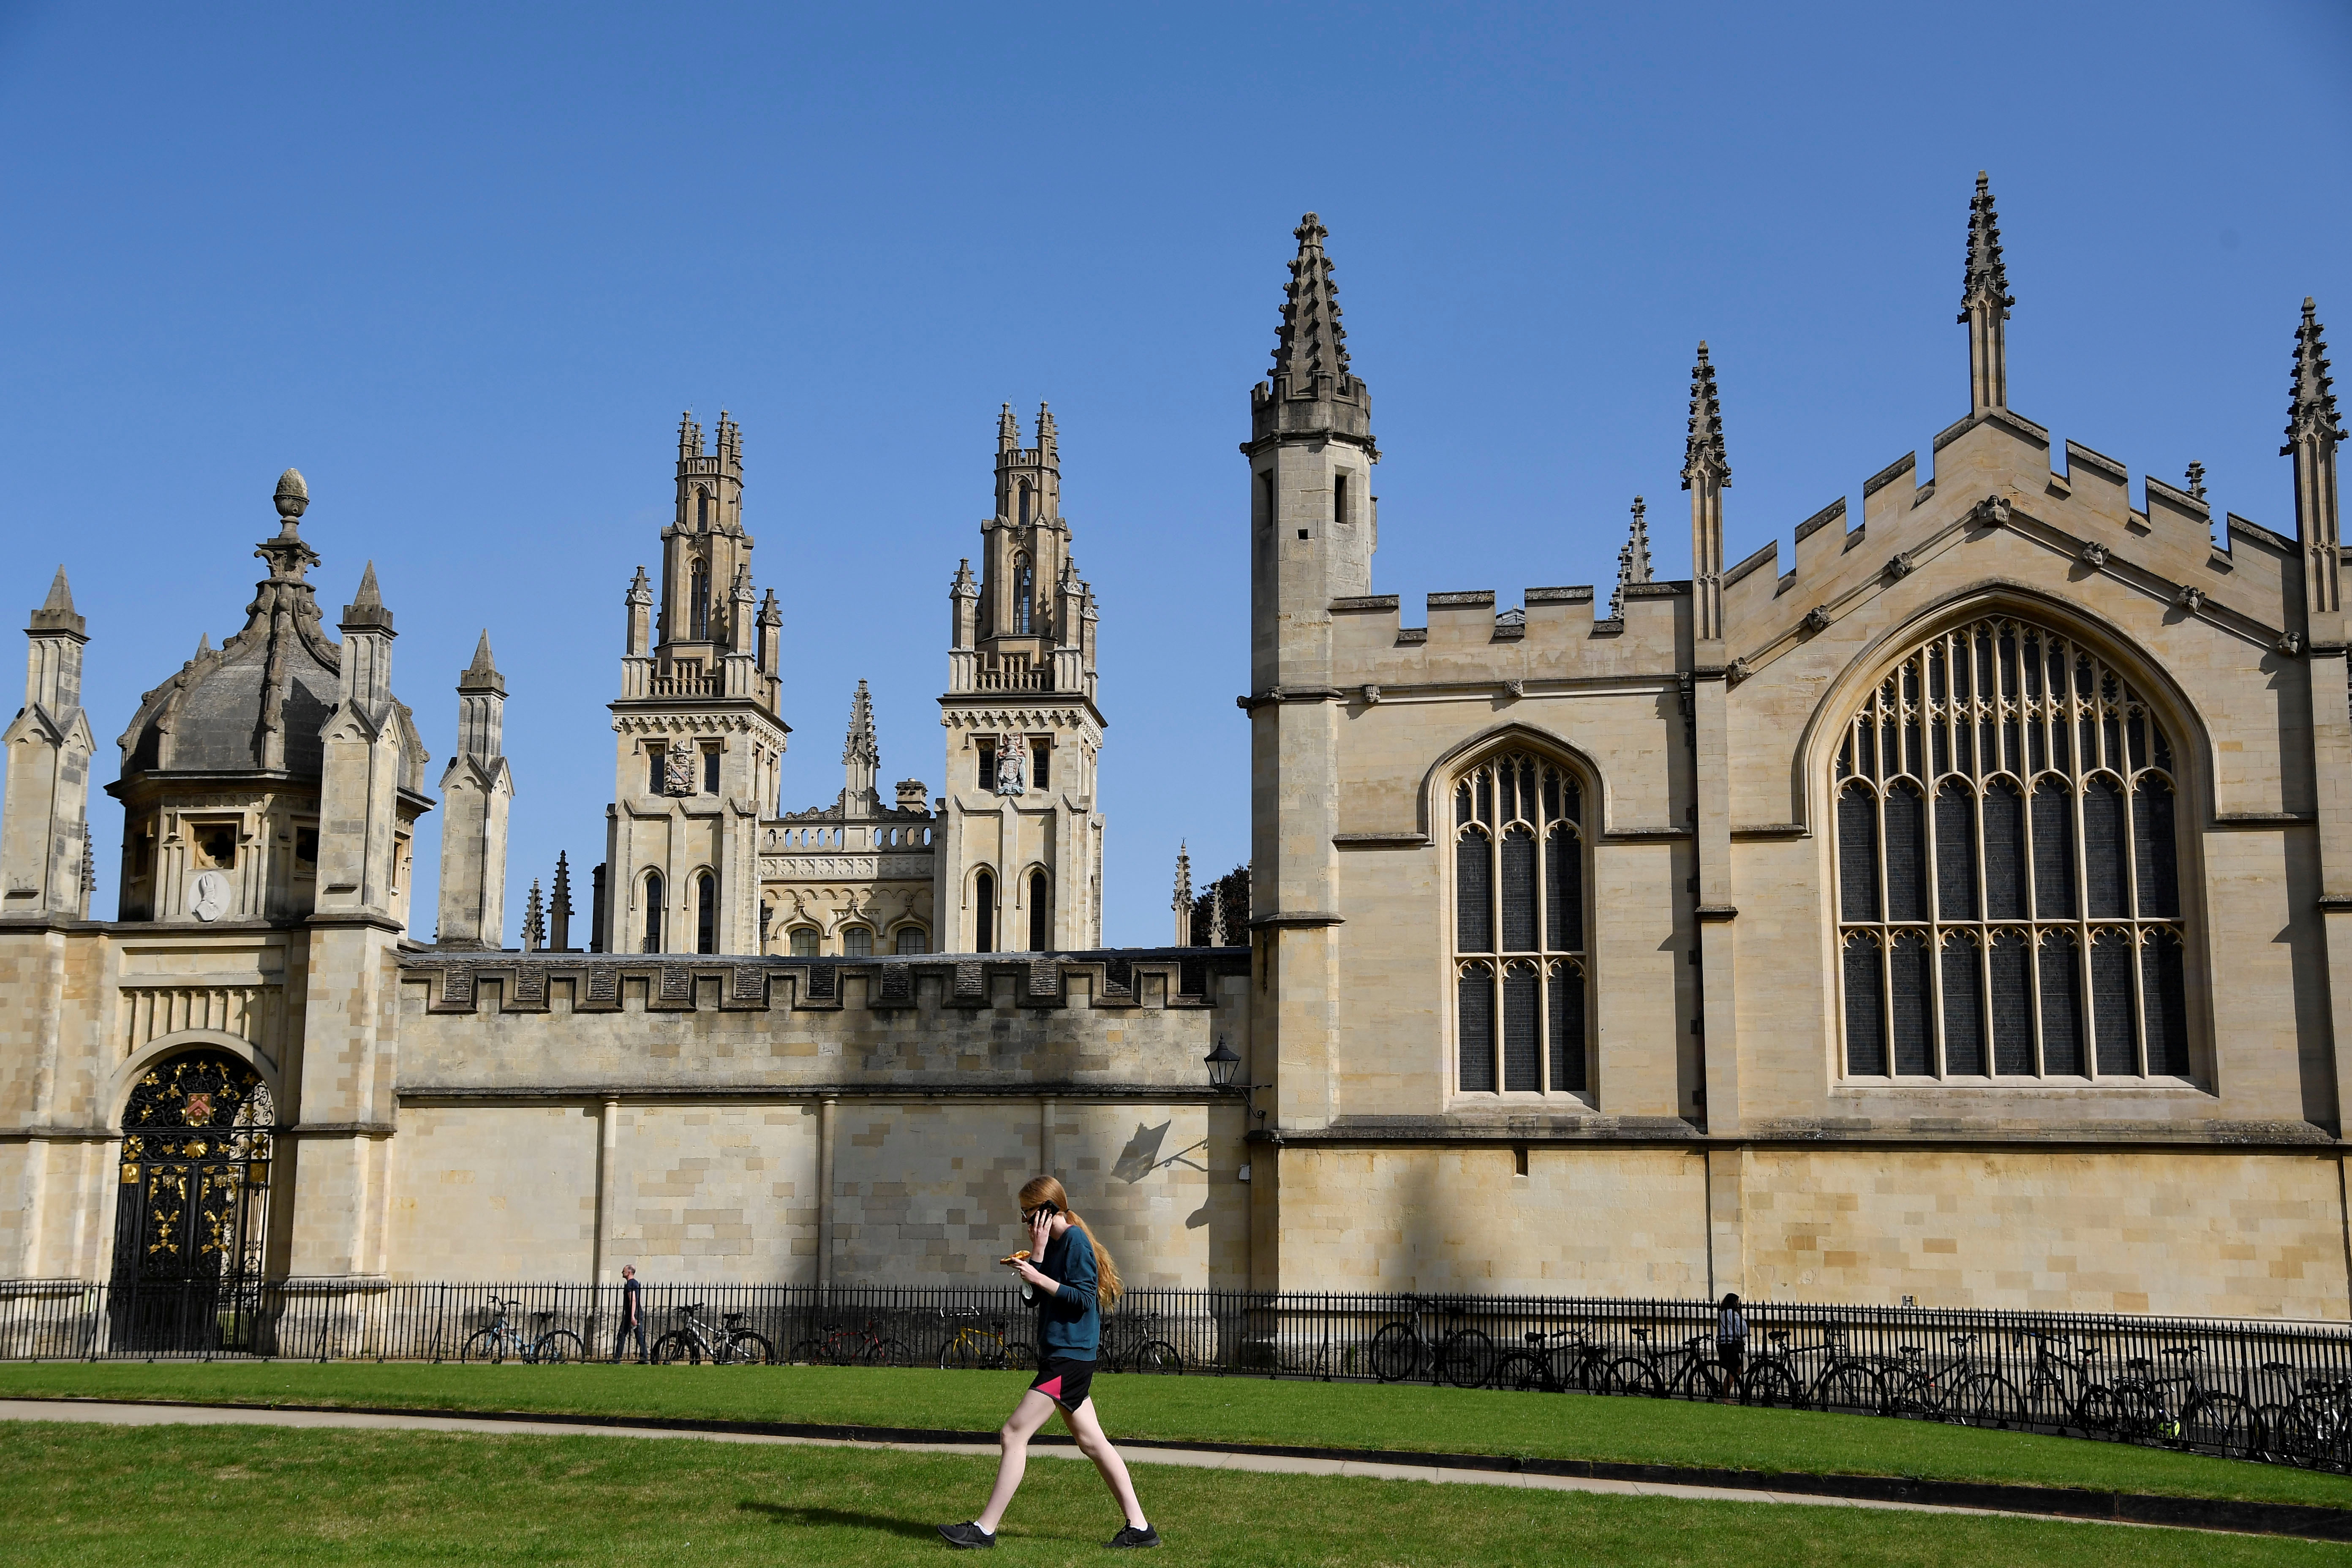 A student walks through a garden outside All Souls College at the University of Oxford, before the new school year (REUTERS/Toby Melville/File photo)